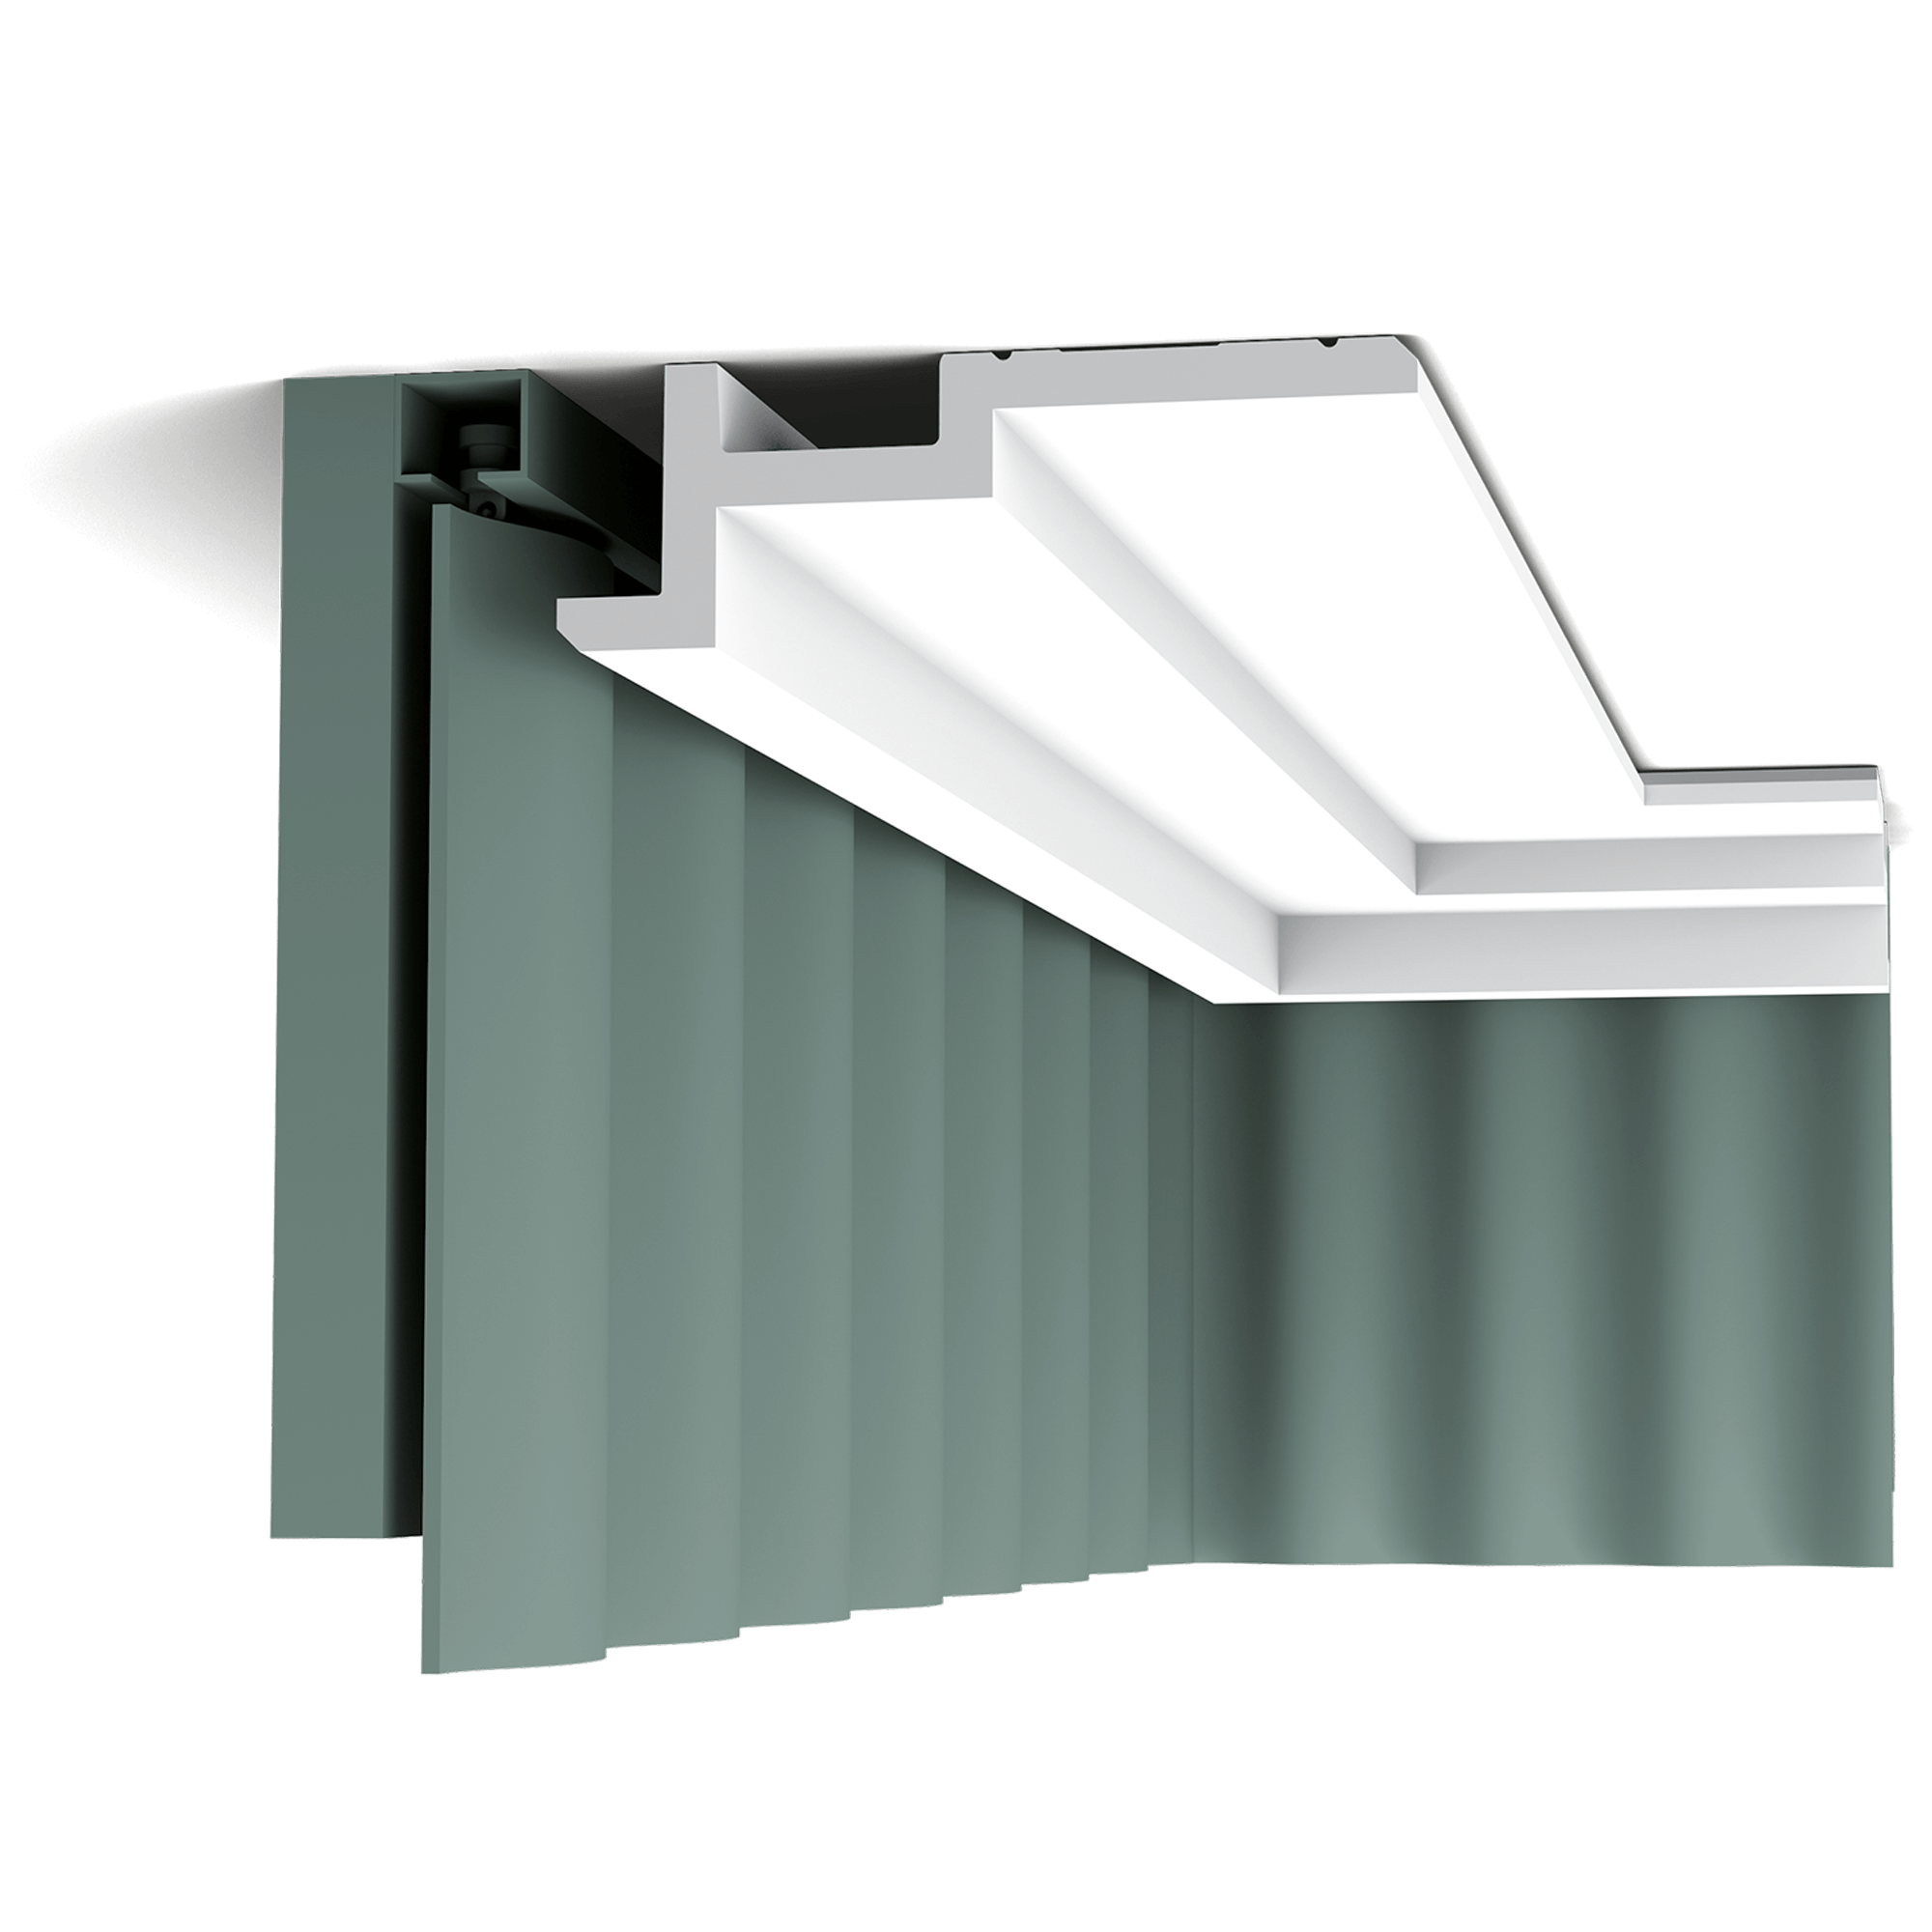 c396 curtain profile 387f This clean, modern profile from the Steps range is also suitable as a curtain pelmet. This nicely conceals the curtain fixtures for a neat finish. Designed by Orio Tonini.